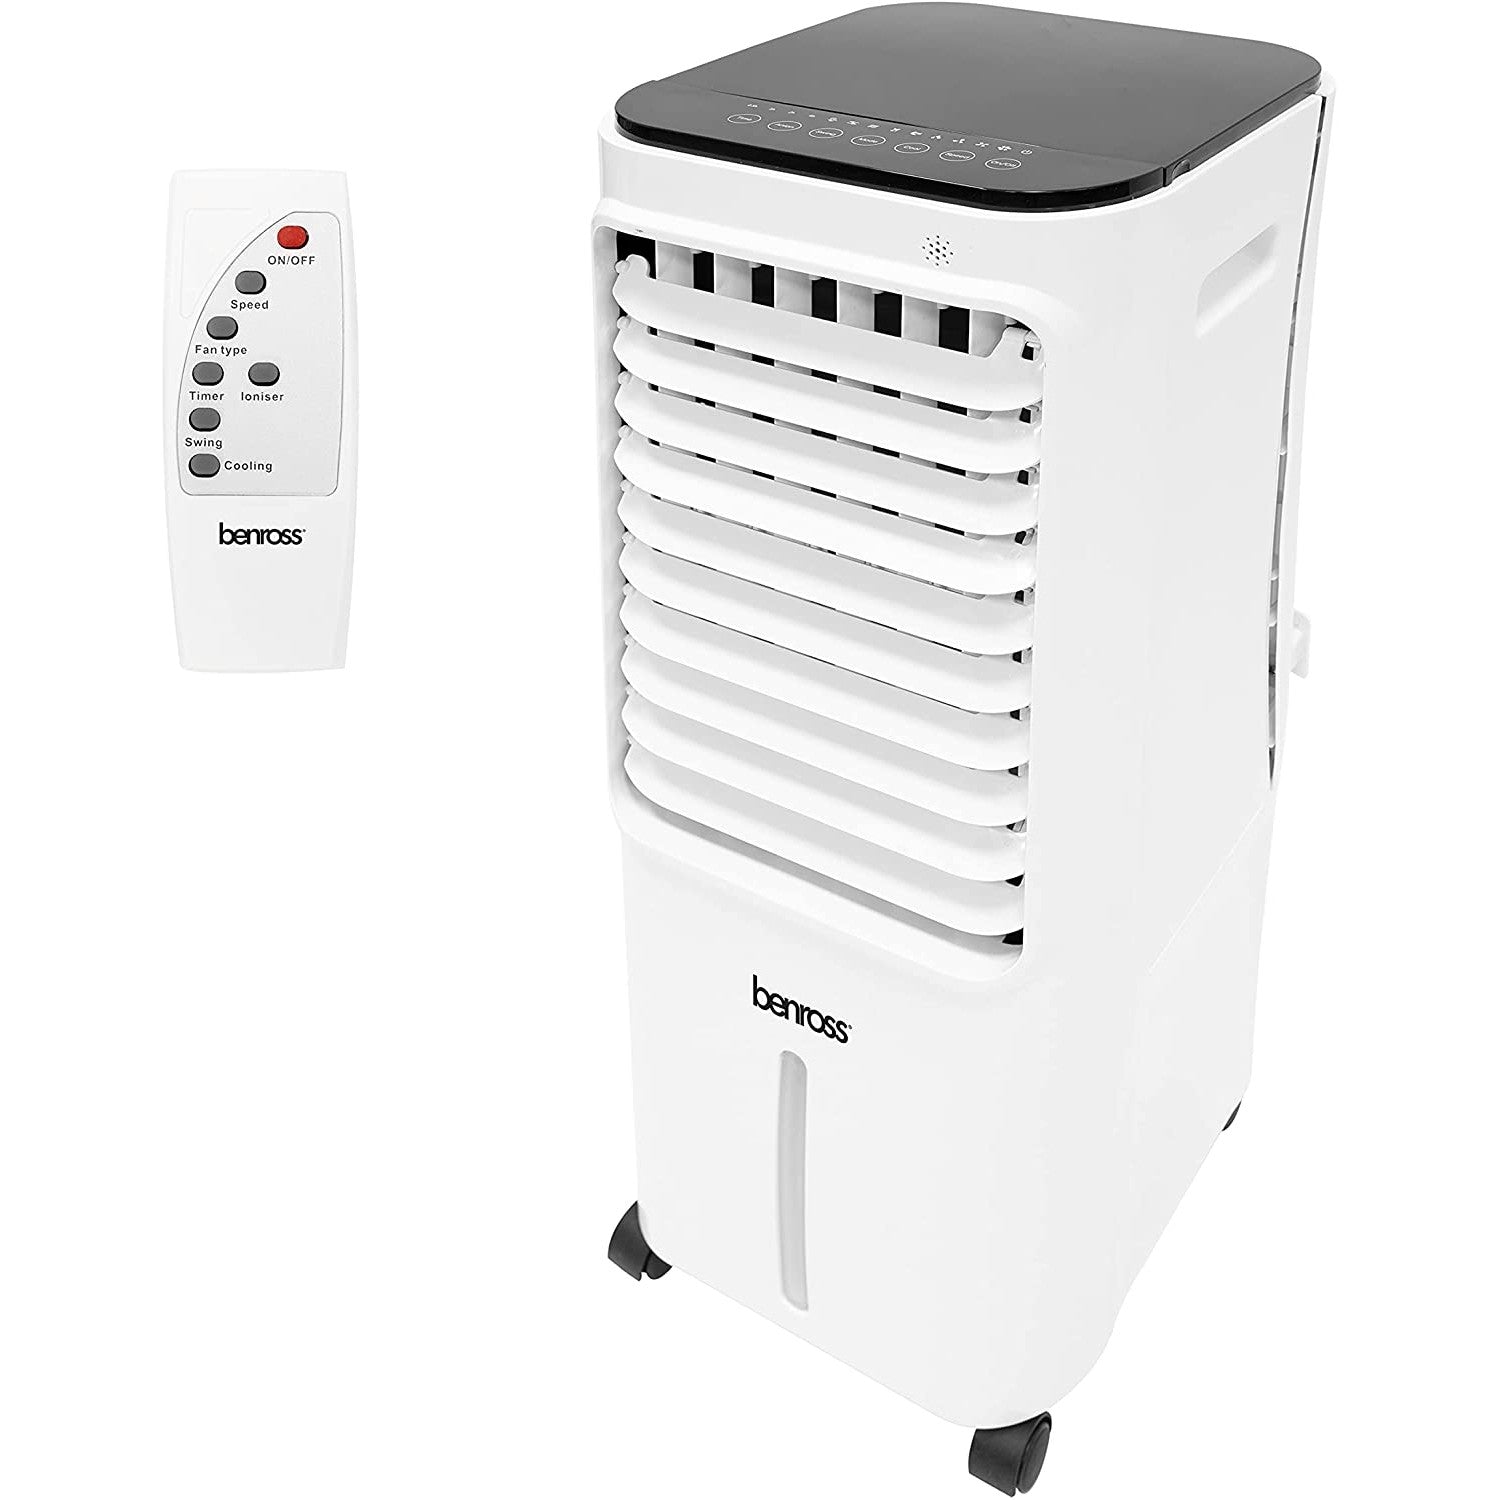 Benross 12L Digital Air Cooler with Remote Control